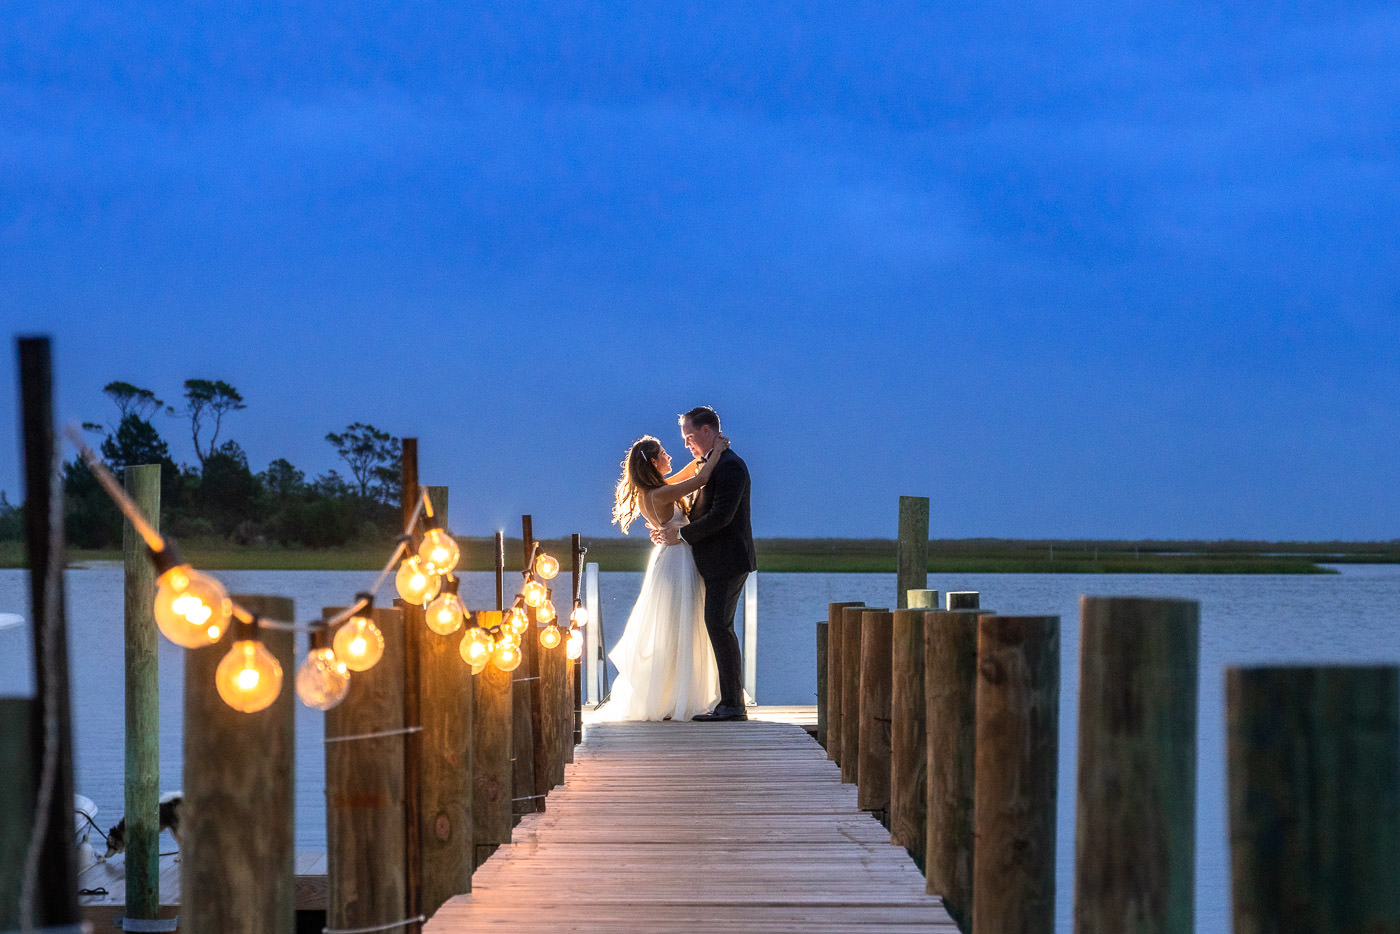 Bride and groom embracing at the end of a boat dock - intercoastal waterway - twilight wedding photo - edison lighting - wedding dress - black tux - wedding photo idea - wilmington nc wedding wedding photographers - chris lang photography